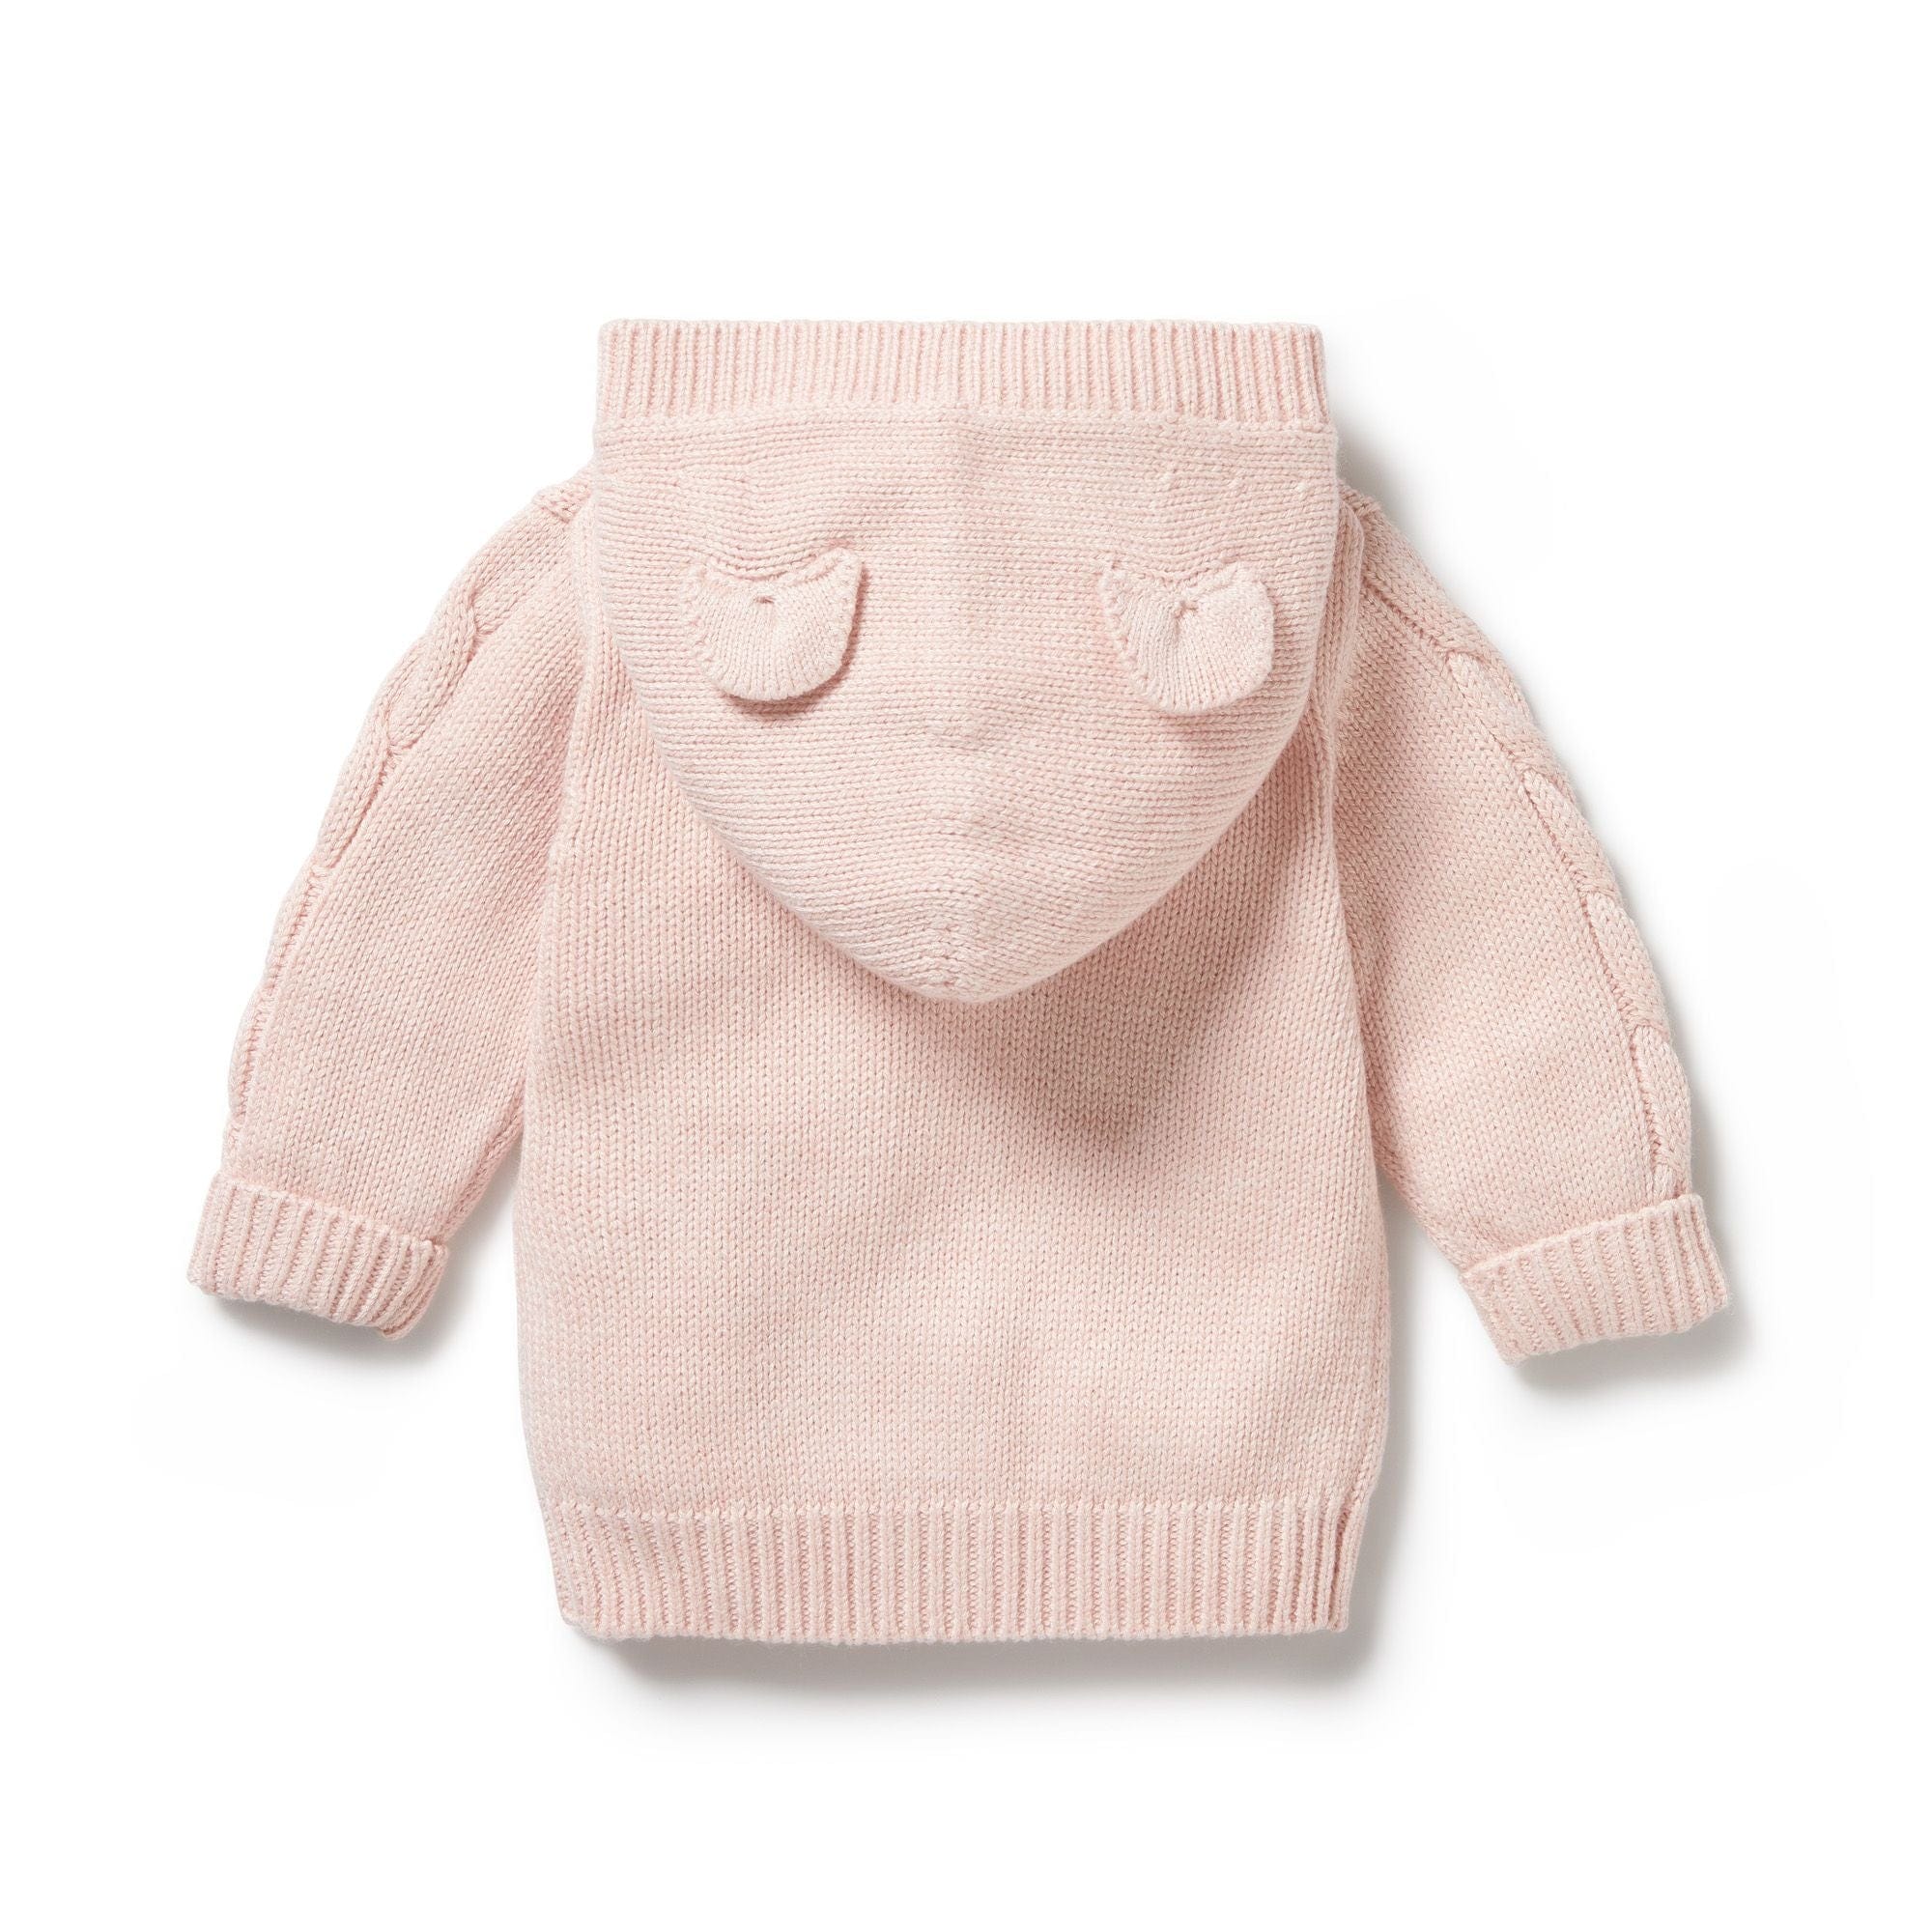 Wilson & Frenchy Girls Jacket Pink Knitted Cable Jacket